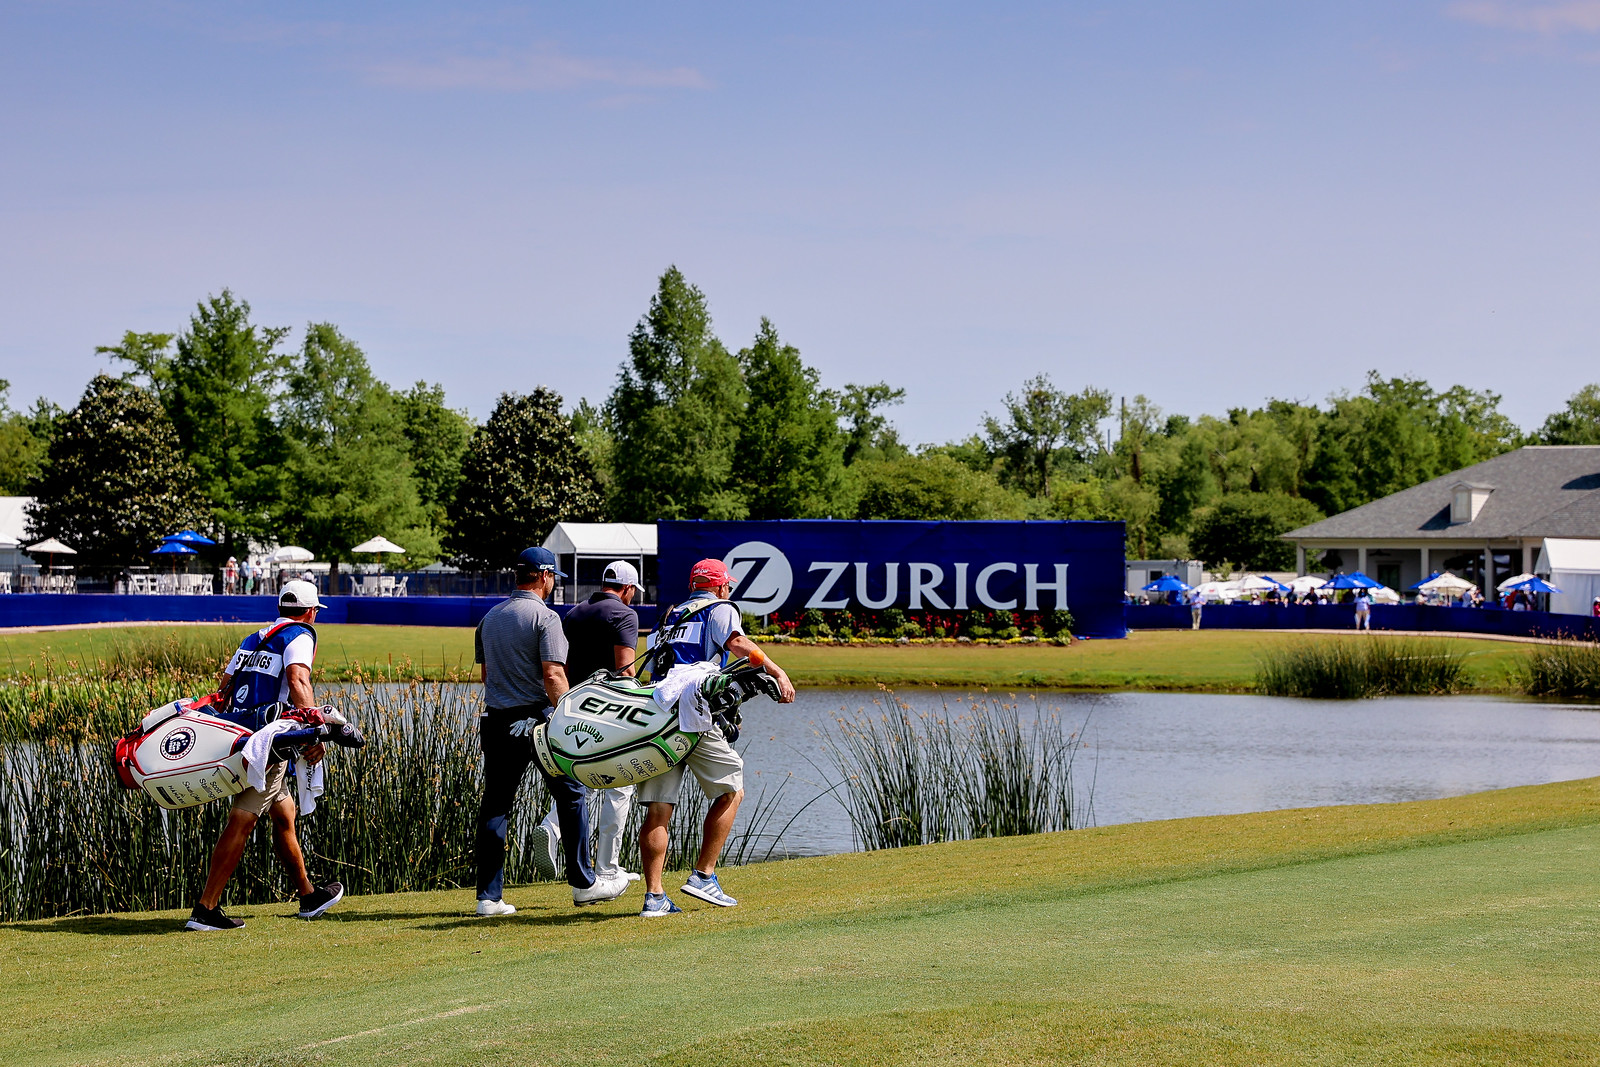 PGA: Zurich Classic of New Orleans - Second Round